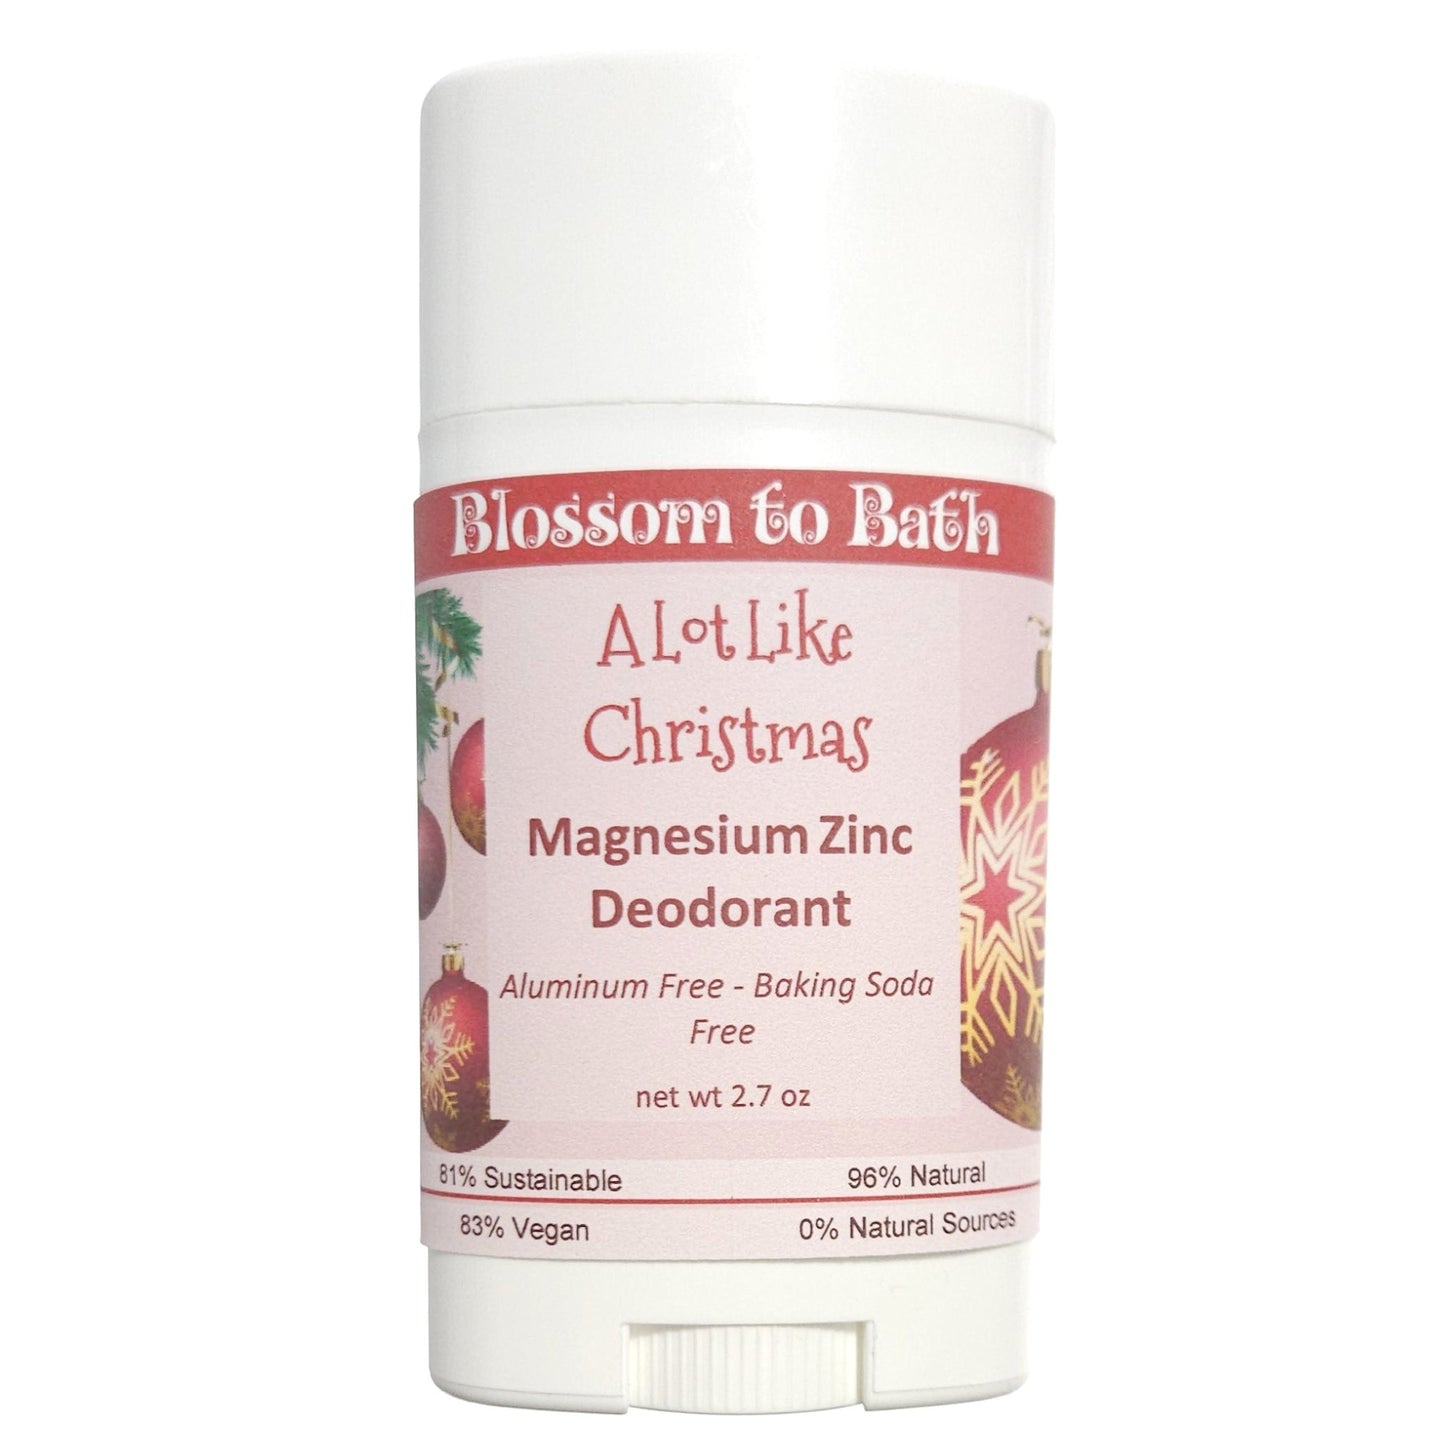 Buy Blossom to Bath A Lot Like Christmas Magnesium Zinc Deodorant from Flowersong Soap Studio.  Long lasting protection made from organic botanicals and butters, made without baking soda, tested in the Arizona heat  Find the holiday mood in an instant with this spicy sweet fragrance.